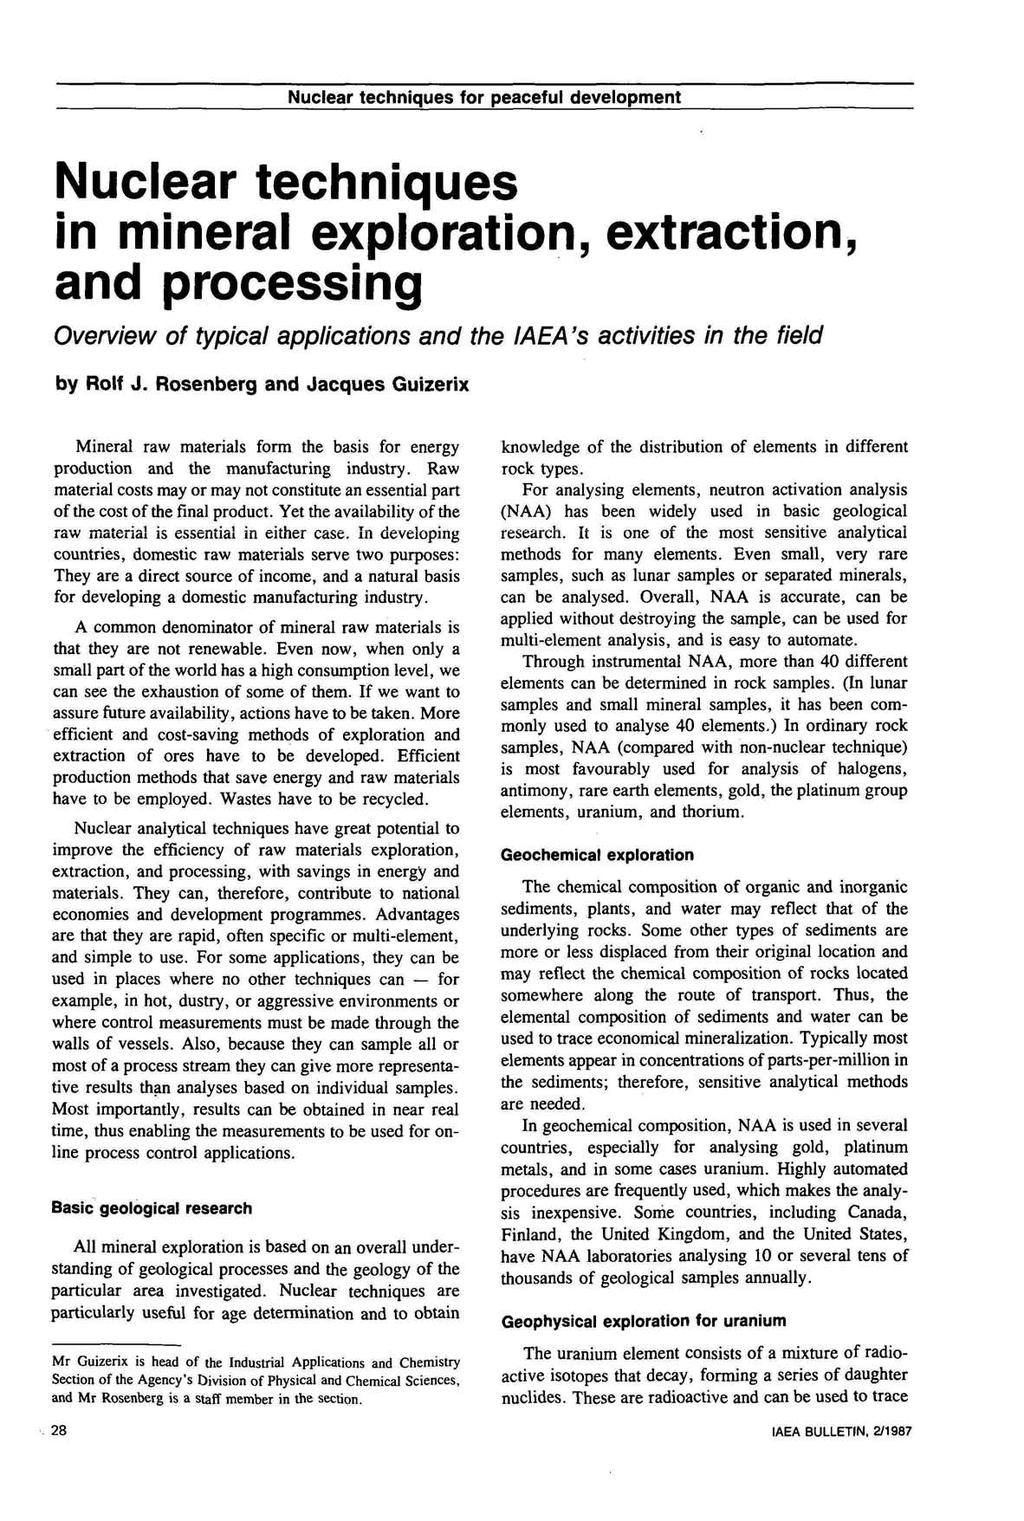 Nuclear techniques in mineral exploration, extraction, and processing Overview of typical applications and the IAEA's activities in the field by Rolf J.